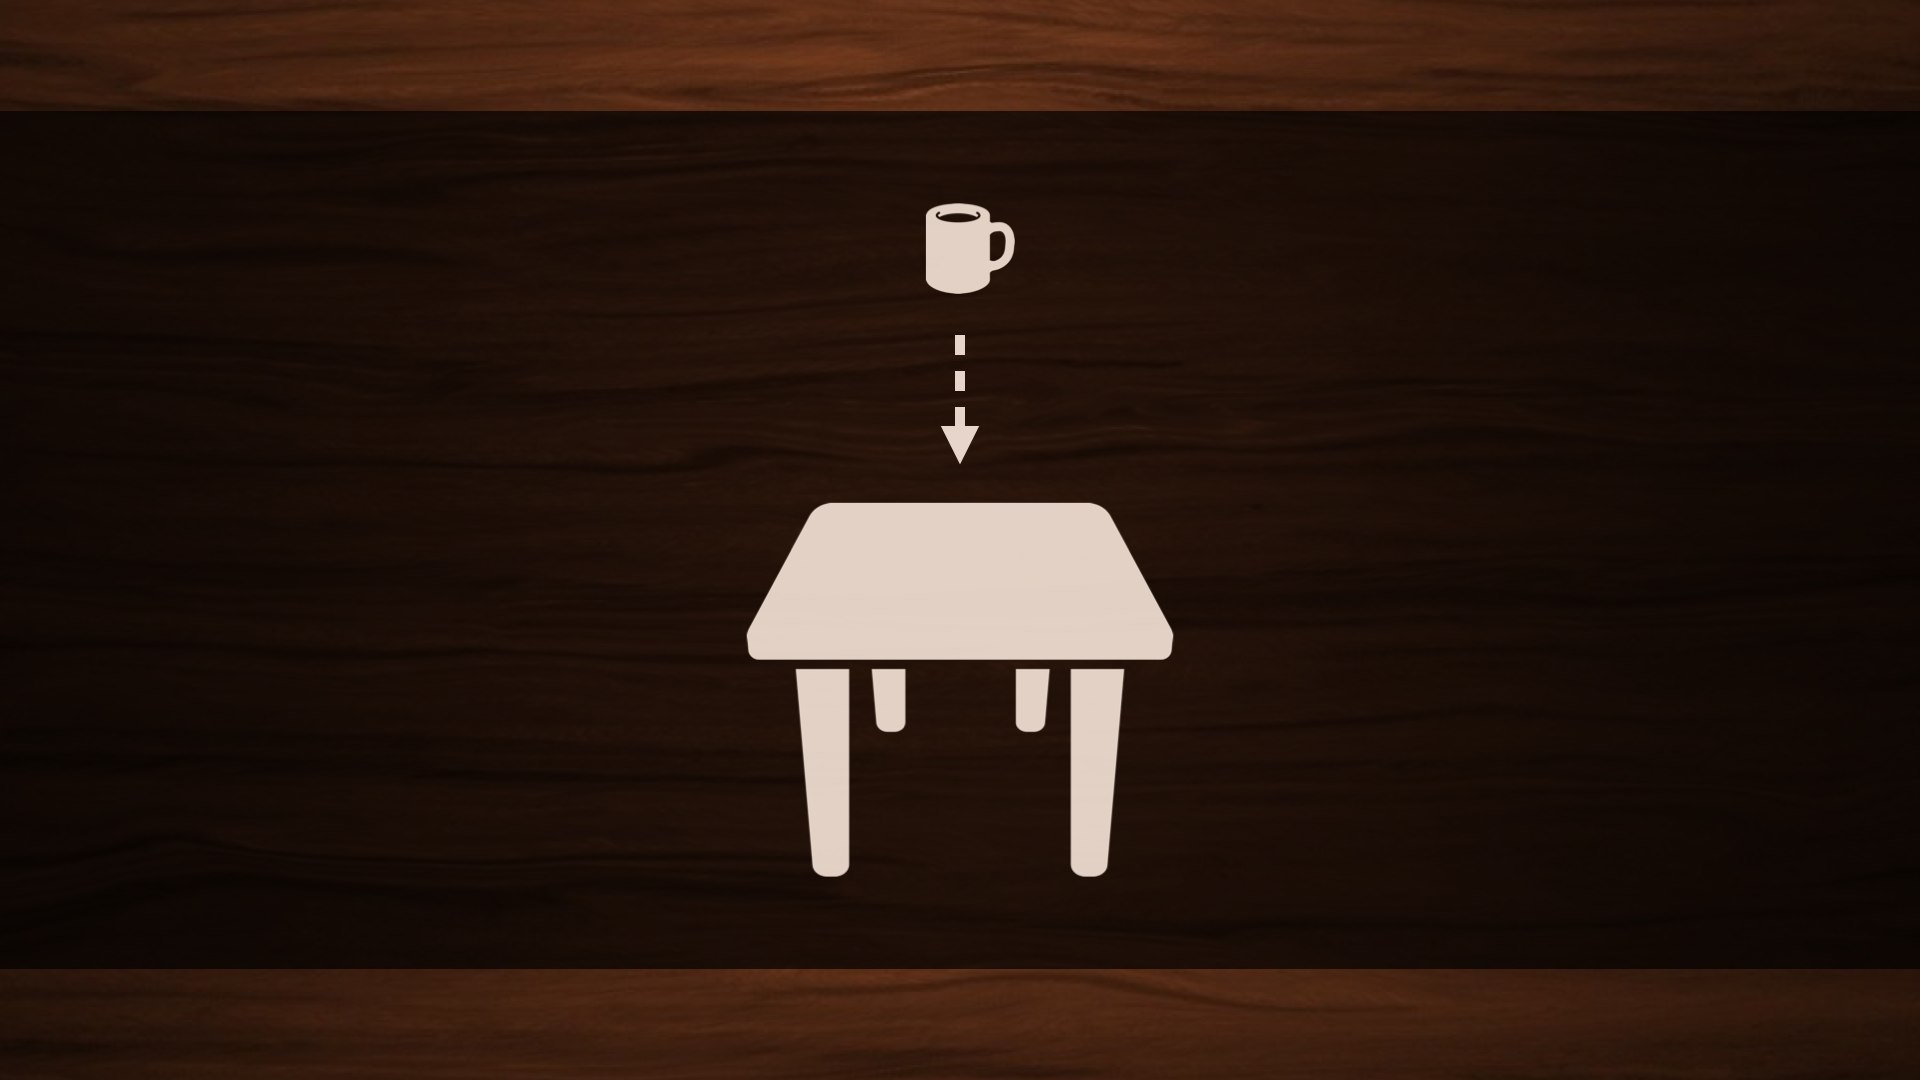 An illustration of a cup of coffee hovering above a table, with an arrow pointing down toward the tabletop